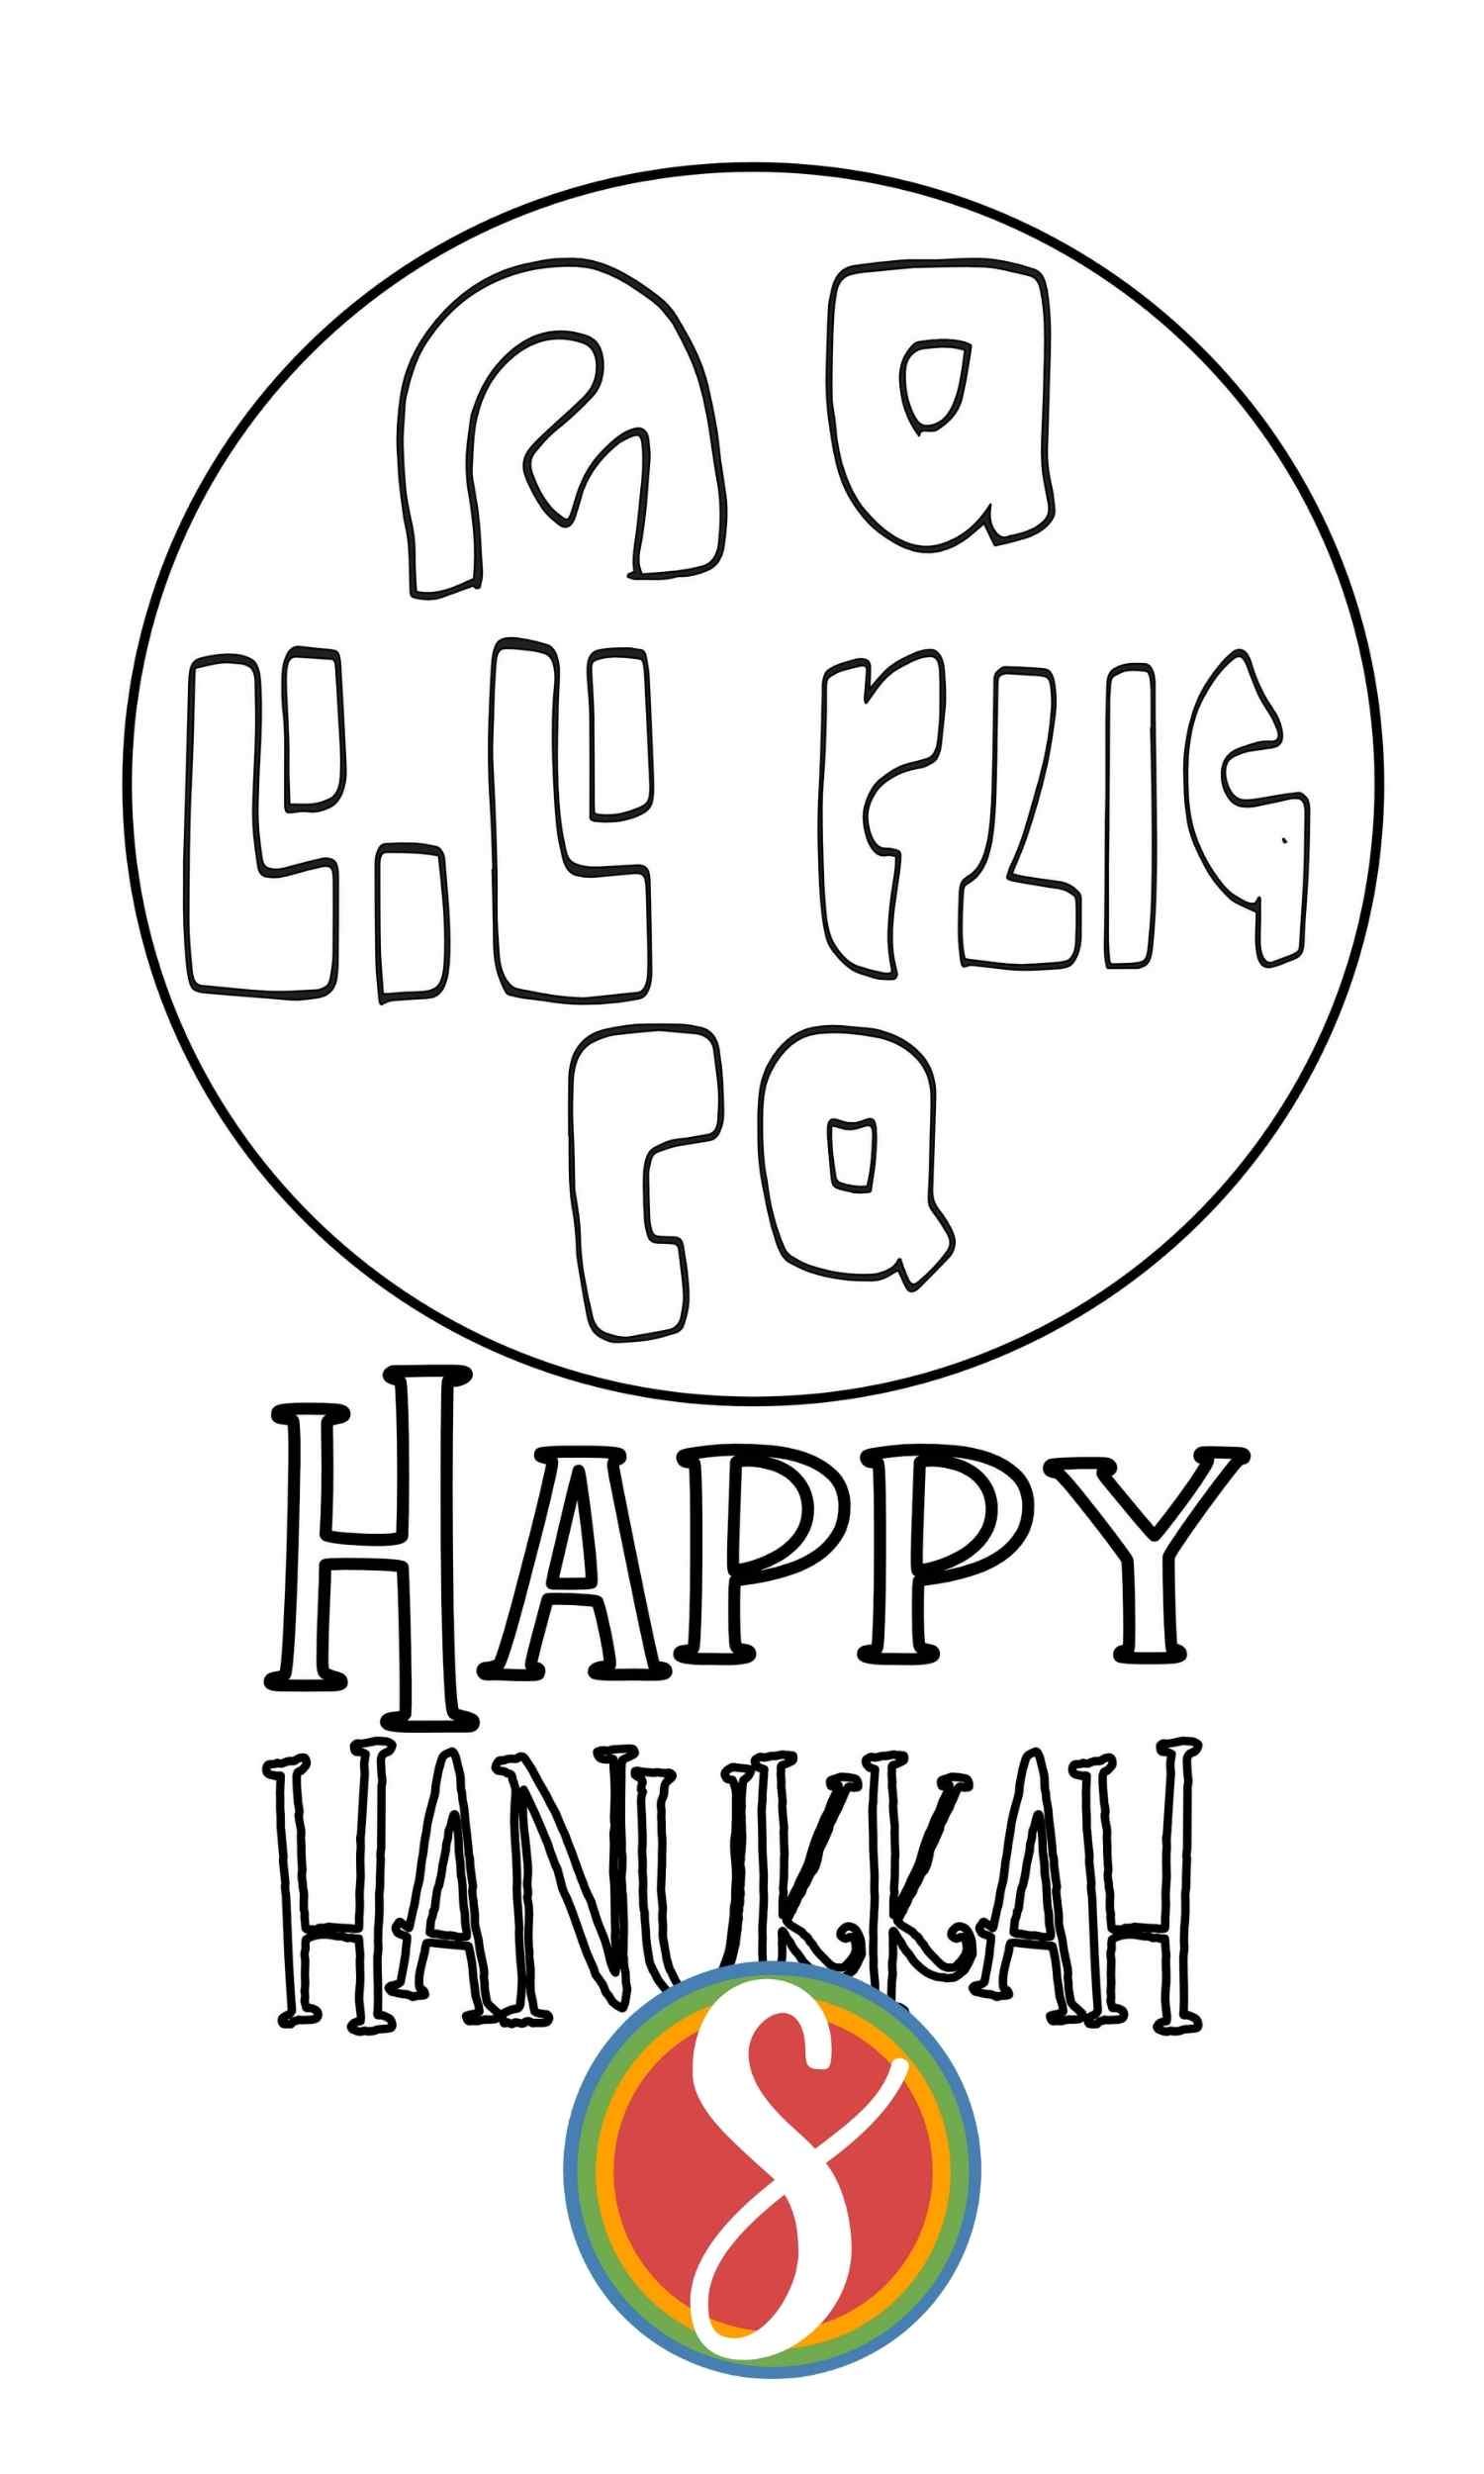 Happy Hannukah coloring page with hebrew letters